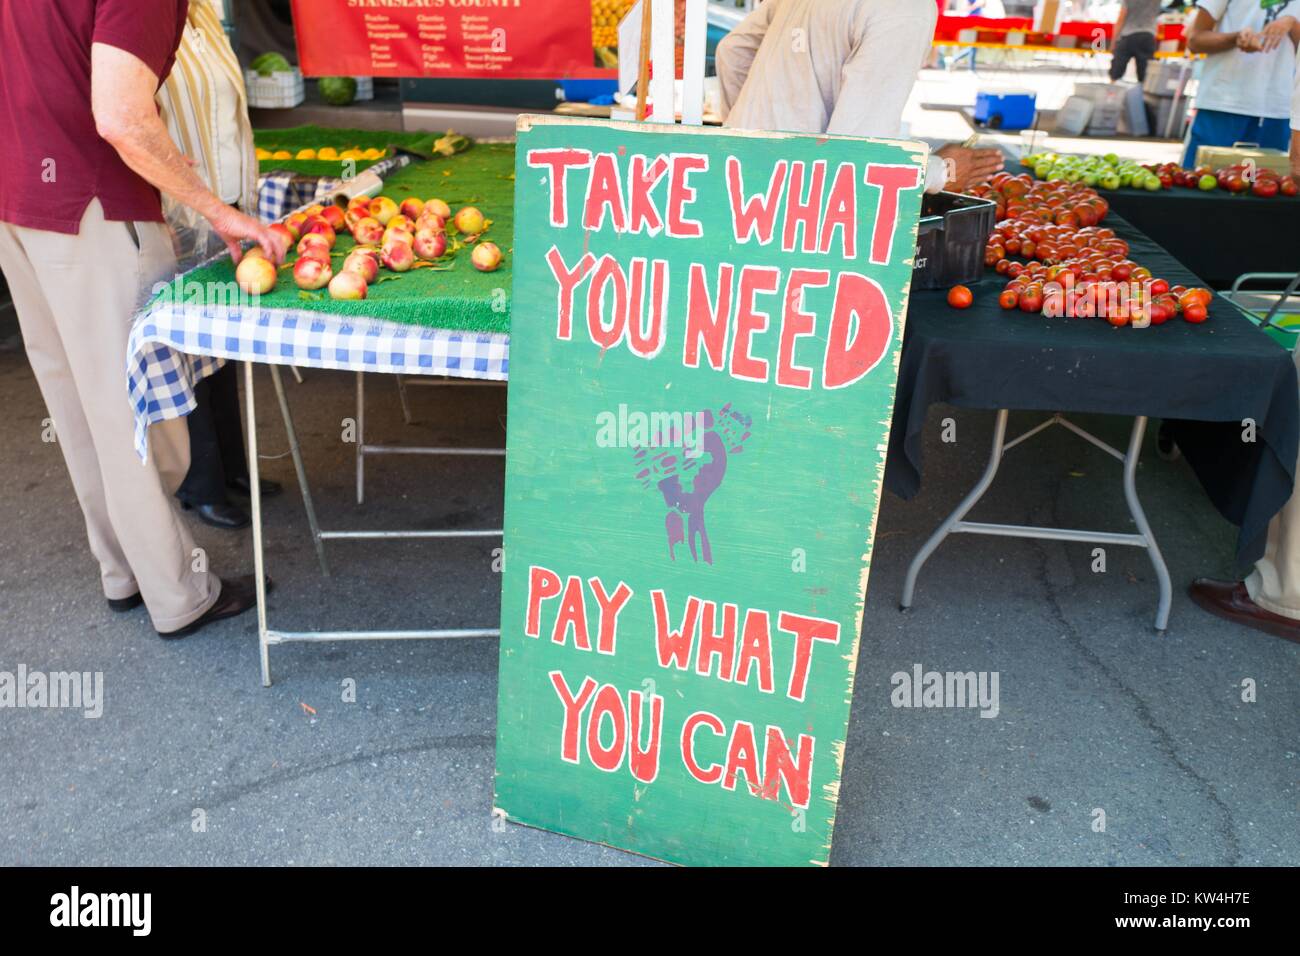 A a farmer's market in the San Francisco Bay Area town of Danville, California, a sign for a collective farm features an image of a fist holding a sheaf of wheat and urges visitors to 'Take what you need, pay what you can', August 13, 2016. Stock Photo